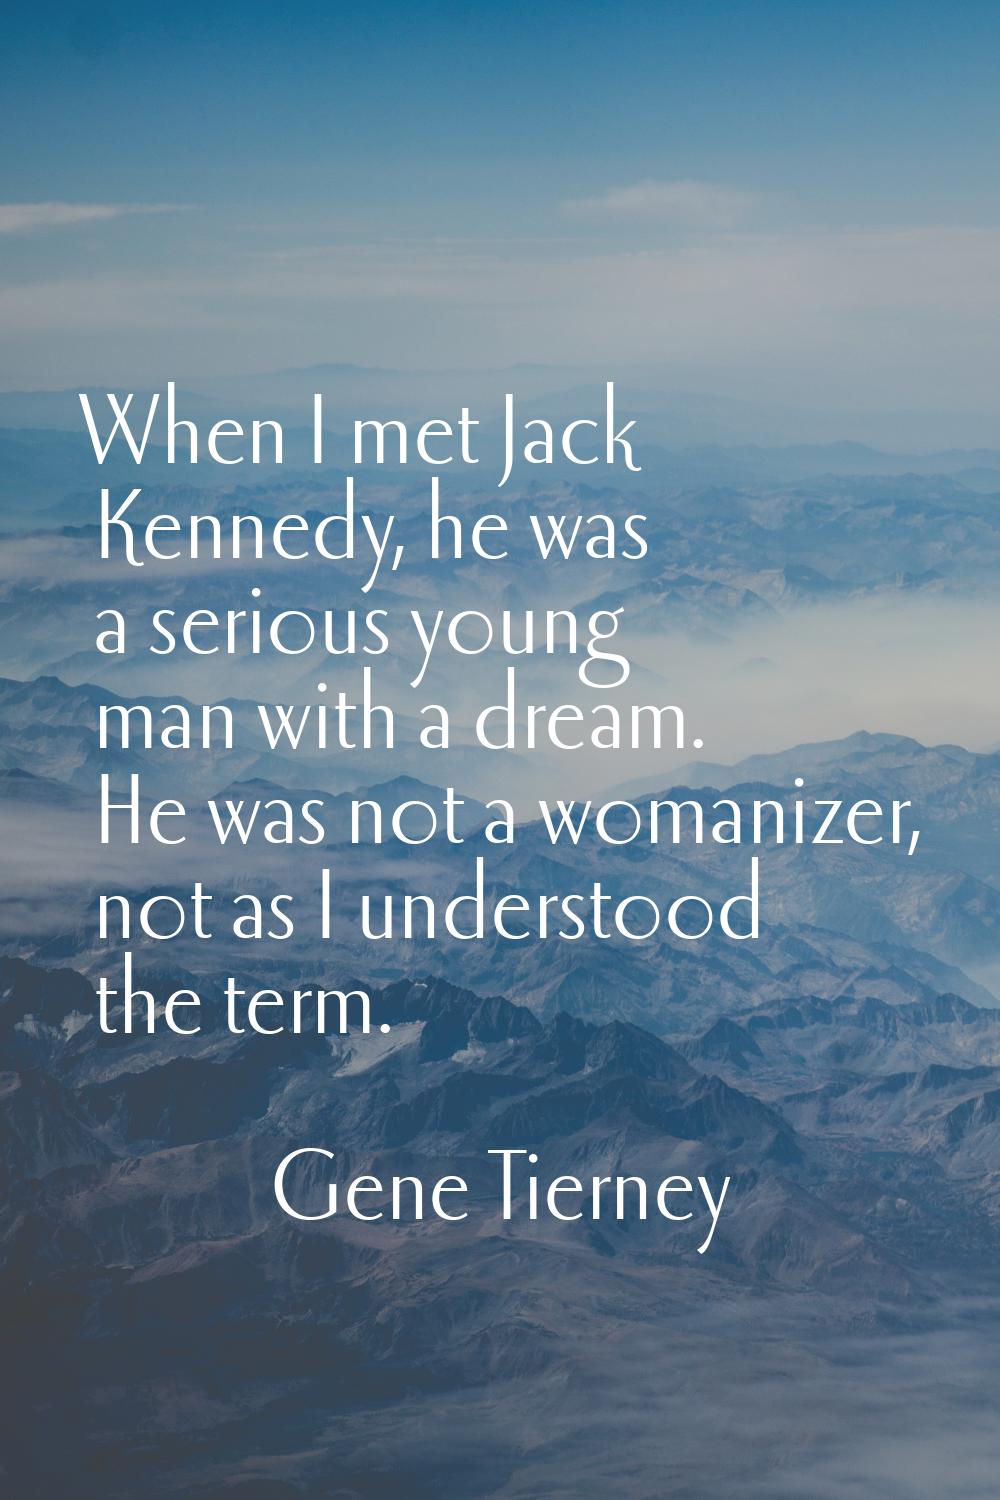 When I met Jack Kennedy, he was a serious young man with a dream. He was not a womanizer, not as I 